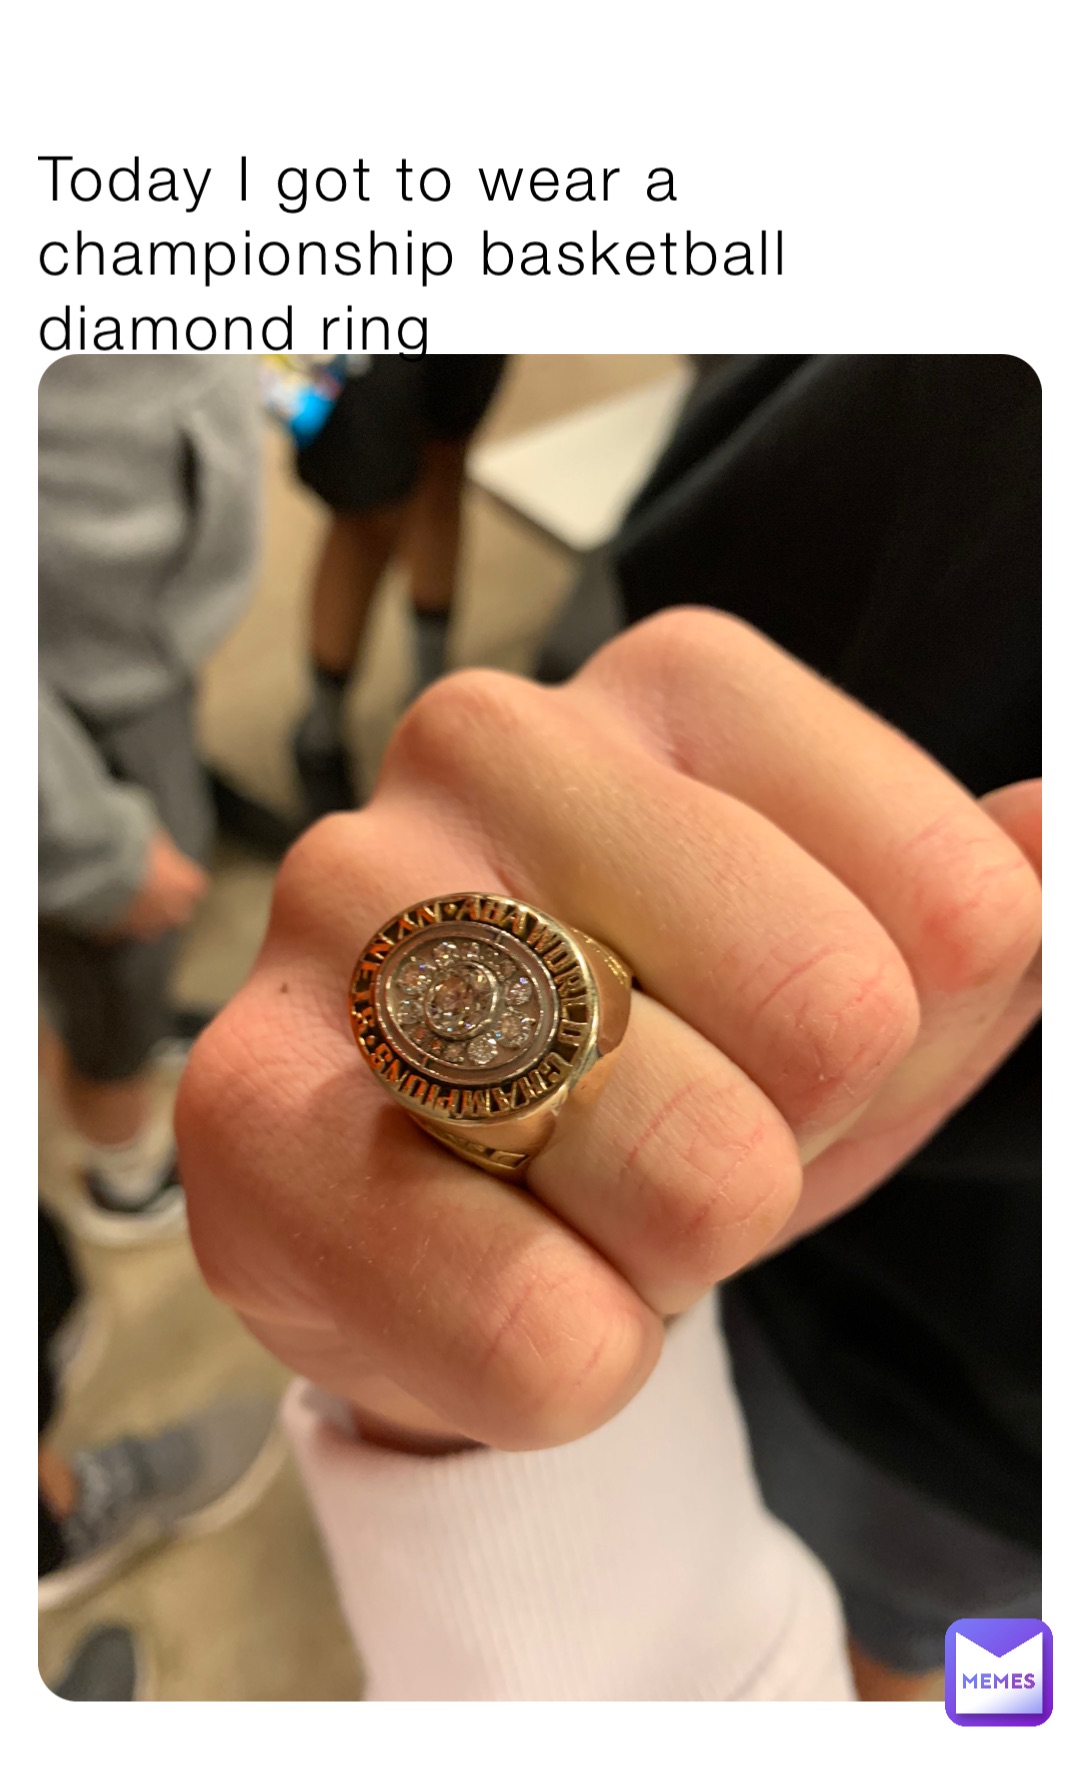 Today I got to wear a championship basketball diamond ring